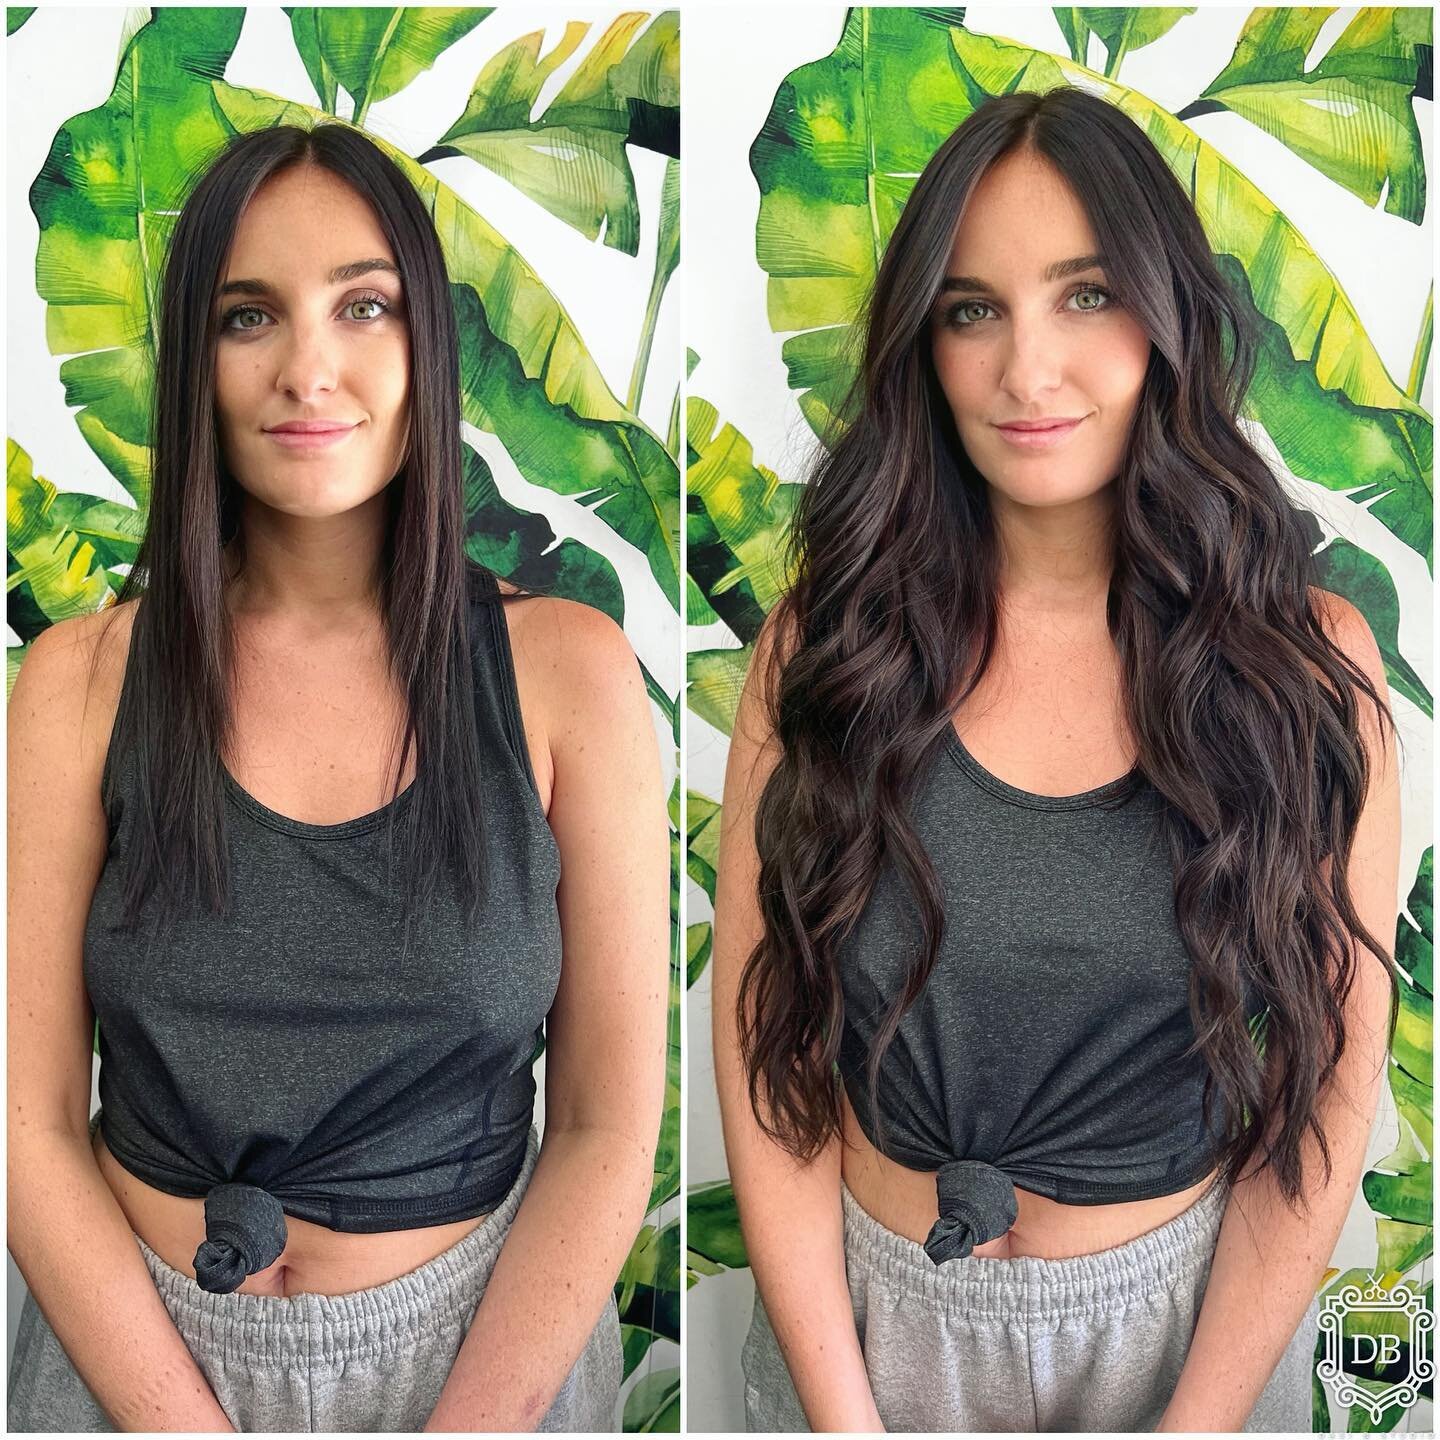 Full head application of 22&rdquo; tape extensions.  Extension install, cut, color and styling by @dasibstudio #dbtapeins 

#tapeinextensions #tapeins #tapeinhairextensions #hairextensions #extensions #santamonicaextensions #santamonicahairextensions